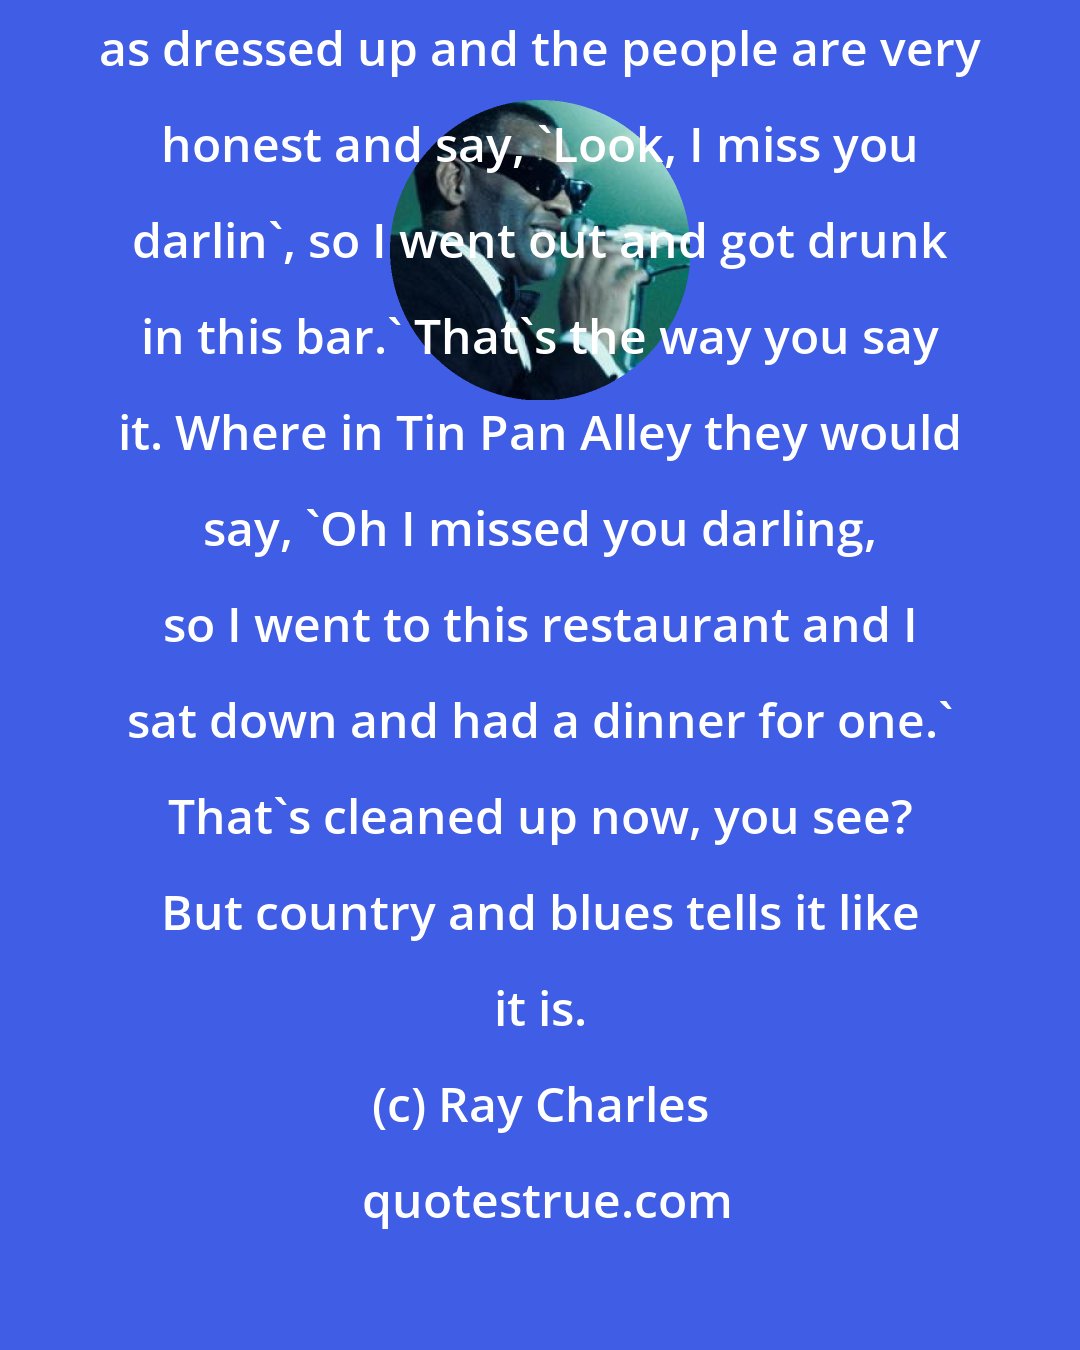 Ray Charles: The words to country songs are very earthy like the blues. They're not as dressed up and the people are very honest and say, 'Look, I miss you darlin', so I went out and got drunk in this bar.' That's the way you say it. Where in Tin Pan Alley they would say, 'Oh I missed you darling, so I went to this restaurant and I sat down and had a dinner for one.' That's cleaned up now, you see? But country and blues tells it like it is.